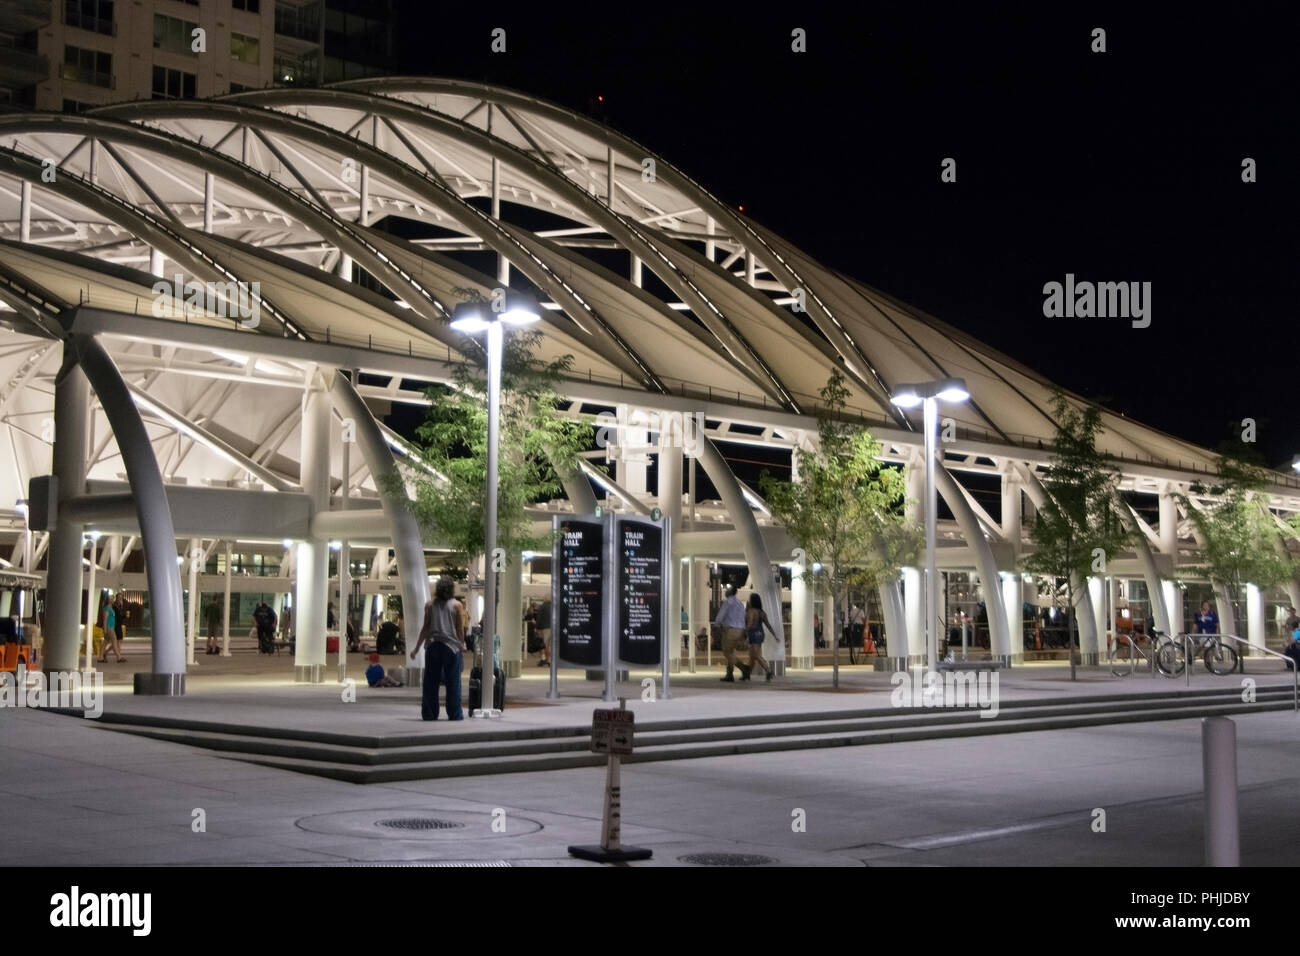 The mulit-modal transportation hub in lower downtown Denver at night. Stock Photo